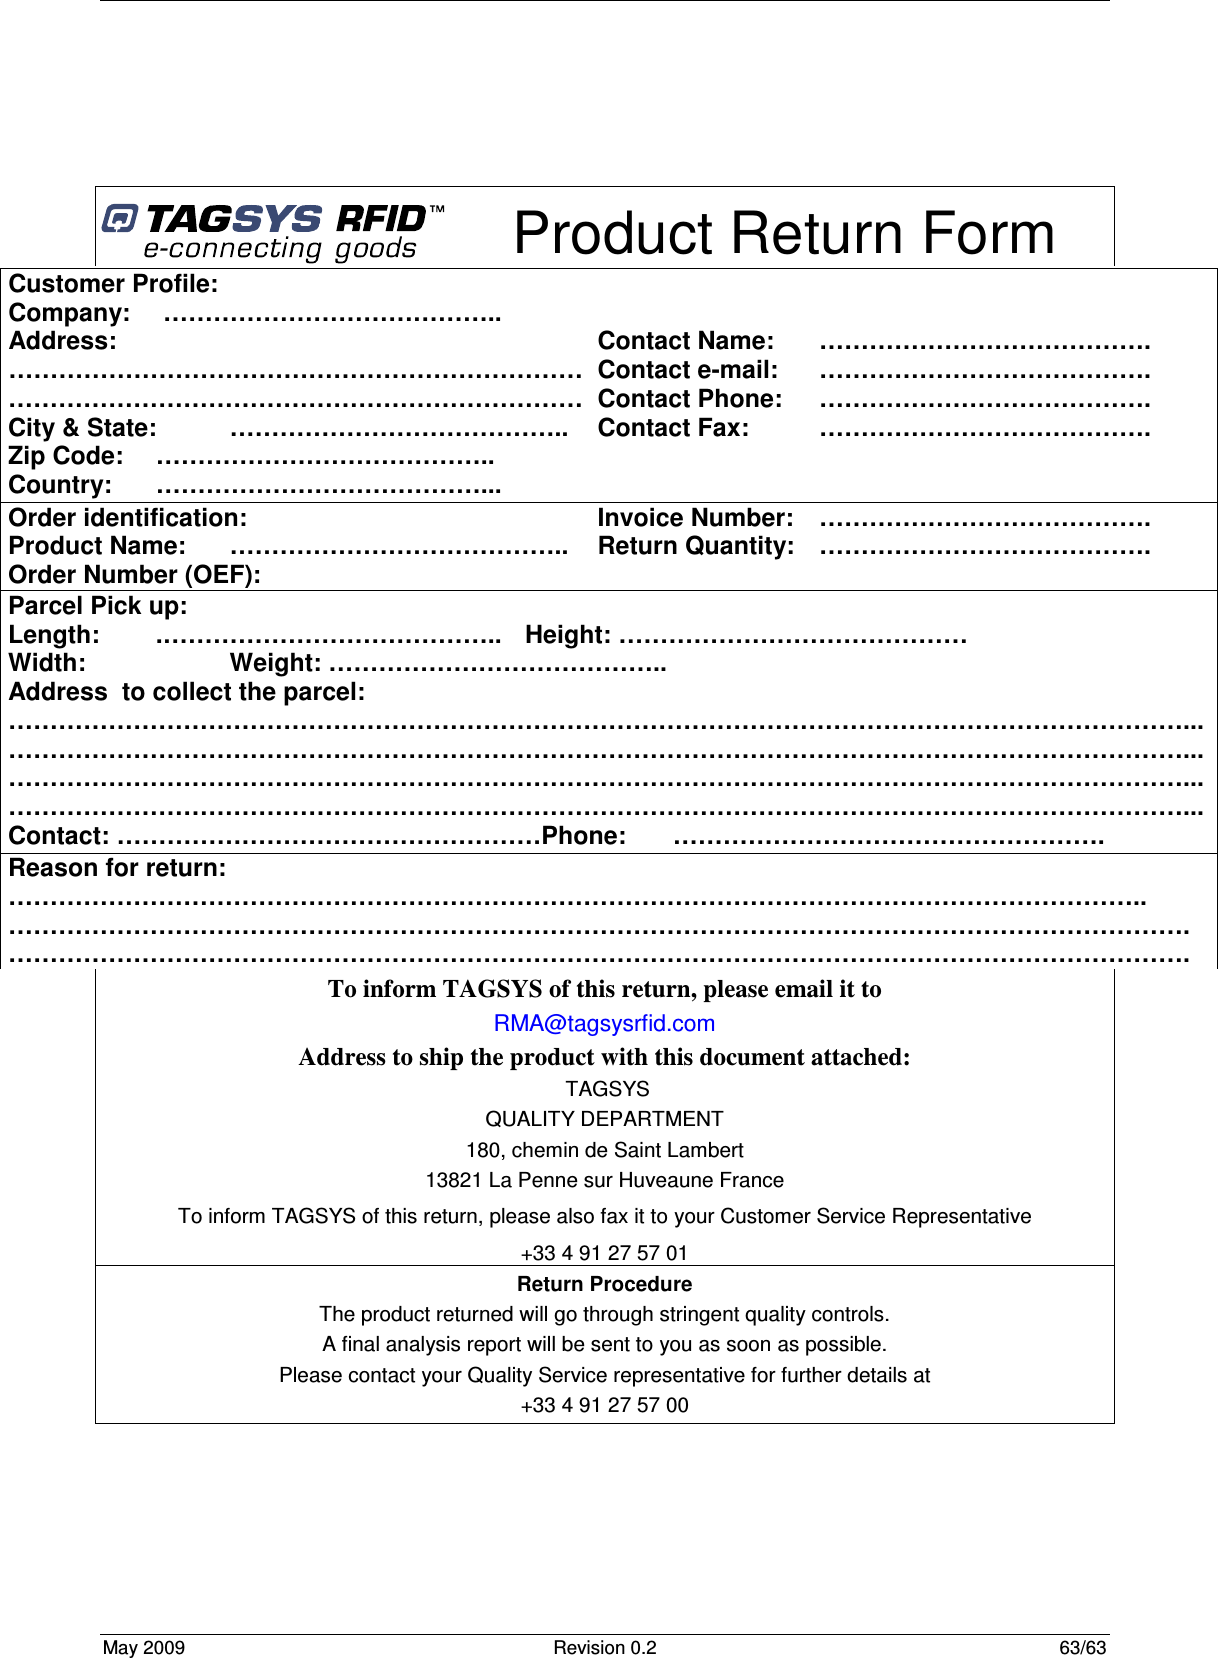  May 2009  Revision 0.2  63/63       Product Return Form To inform TAGSYS of this return, please email it to RMA@tagsysrfid.com Address to ship the product with this document attached:  TAGSYS QUALITY DEPARTMENT 180, chemin de Saint Lambert 13821 La Penne sur Huveaune France To inform TAGSYS of this return, please also fax it to your Customer Service Representative +33 4 91 27 57 01 Return Procedure The product returned will go through stringent quality controls. A final analysis report will be sent to you as soon as possible. Please contact your Quality Service representative for further details at  +33 4 91 27 57 00  Customer Profile: Company:   ………………………………….. Address:      …………………………………………………………… …………………………………………………………… City &amp; State:  ………………………………….. Zip Code:  ………………………………….. Country:  …………………………………...   Contact Name:  …………………………………. Contact e-mail:   …………………………………. Contact Phone:  …………………………………. Contact Fax:  …………………………………. Order identification: Product Name:  ………………………………….. Order Number (OEF):   Invoice Number:  …………………………………. Return Quantity:   …………………………………. Parcel Pick up: Length:   .…………………………………..  Height: …………………………………… Width:     Weight: ………………………………….. Address  to collect the parcel: ……………………………………………………………………………………………………………………………... ……………………………………………………………………………………………………………………………... ……………………………………………………………………………………………………………………………... ……………………………………………………………………………………………………………………………... Contact: ……………………………………………Phone:   ……………………………………………. Reason for return: ……………………………………………………………………………………………………………………….. ……………………………………………………………………………………………………………………………. ……………………………………………………………………………………………………………………………. 